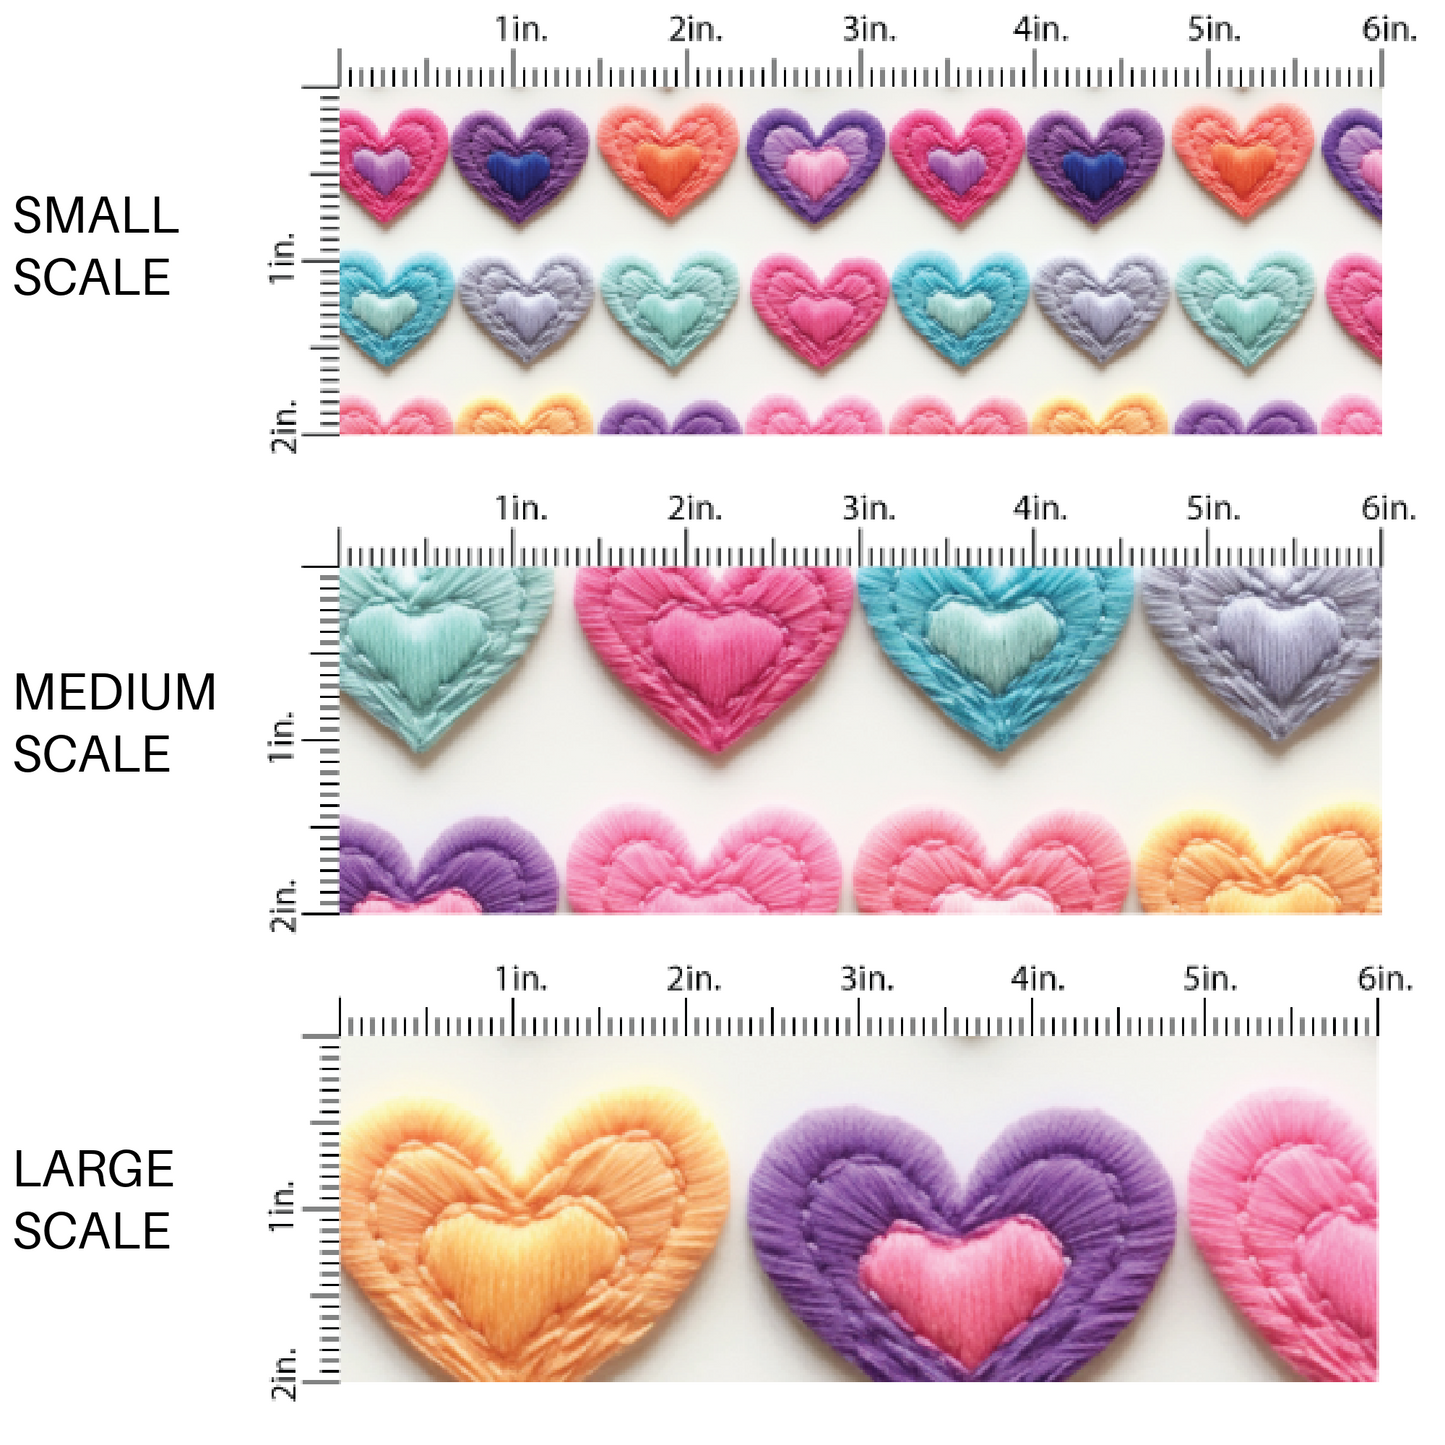 Faux Embroidered Multi-Colored Hearts on White Fabric by the Yard scaled image guide.